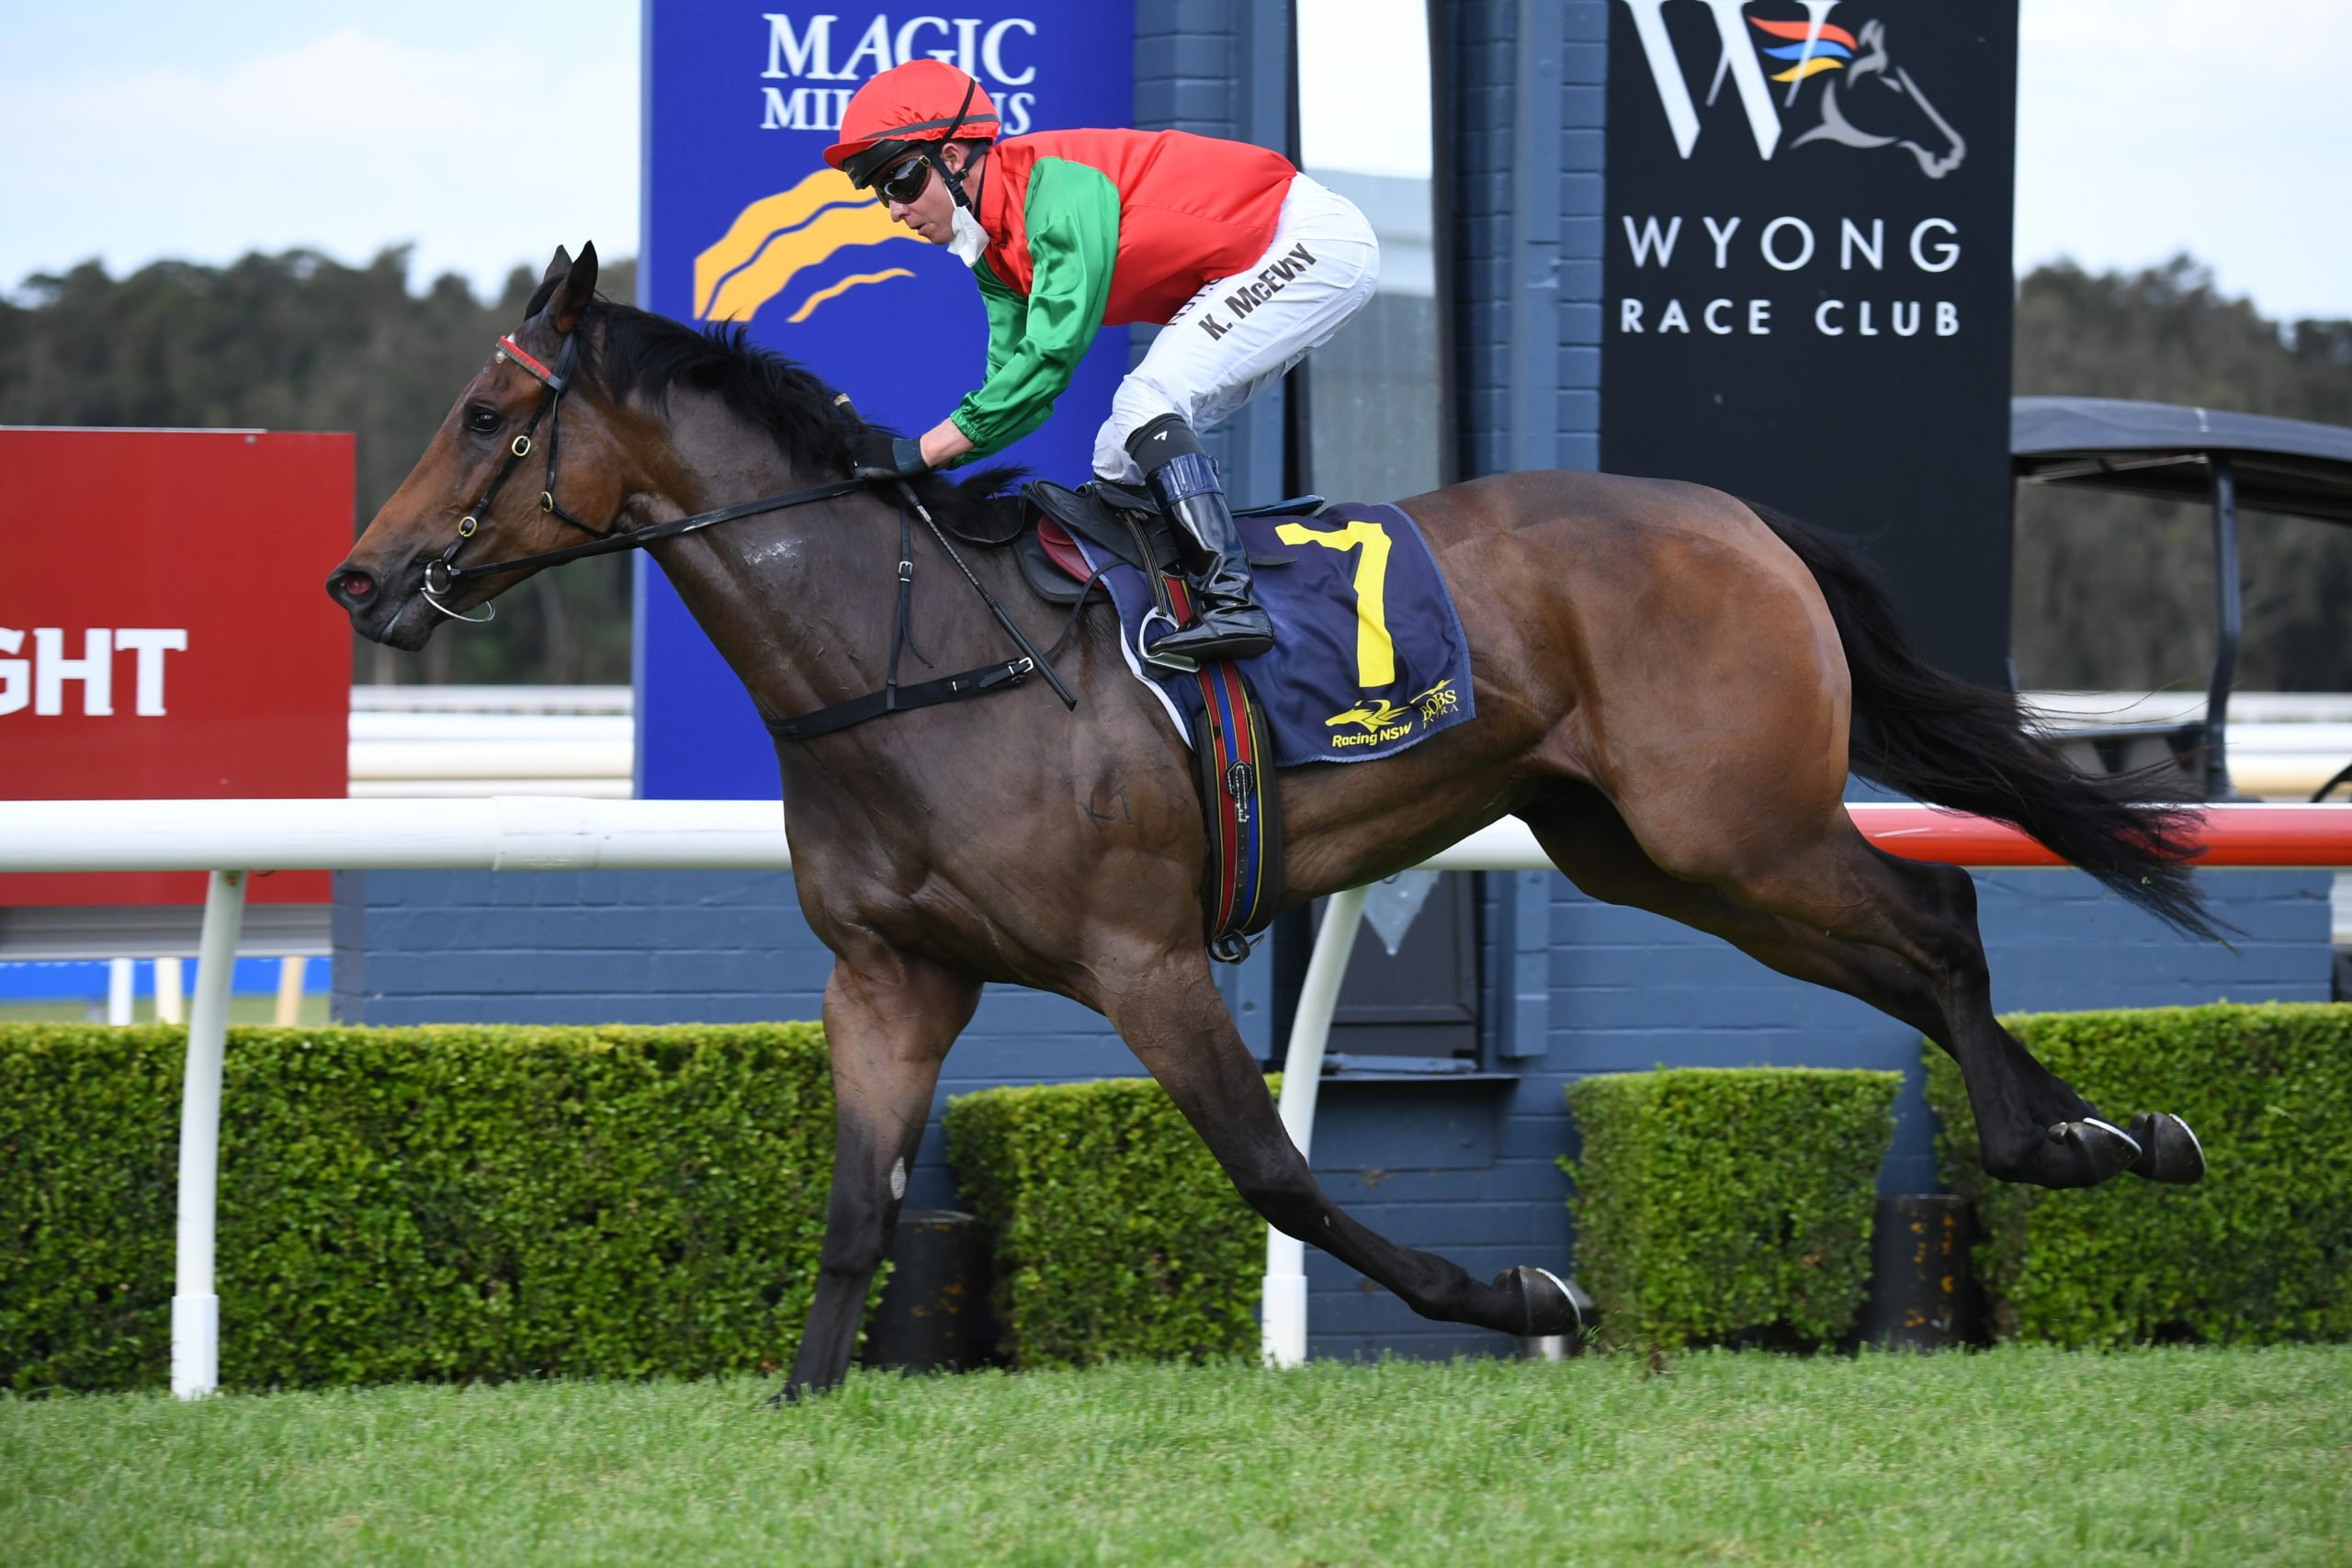 FOUR PILLARS CANDIDATES ON SHOW AT WYONG 1